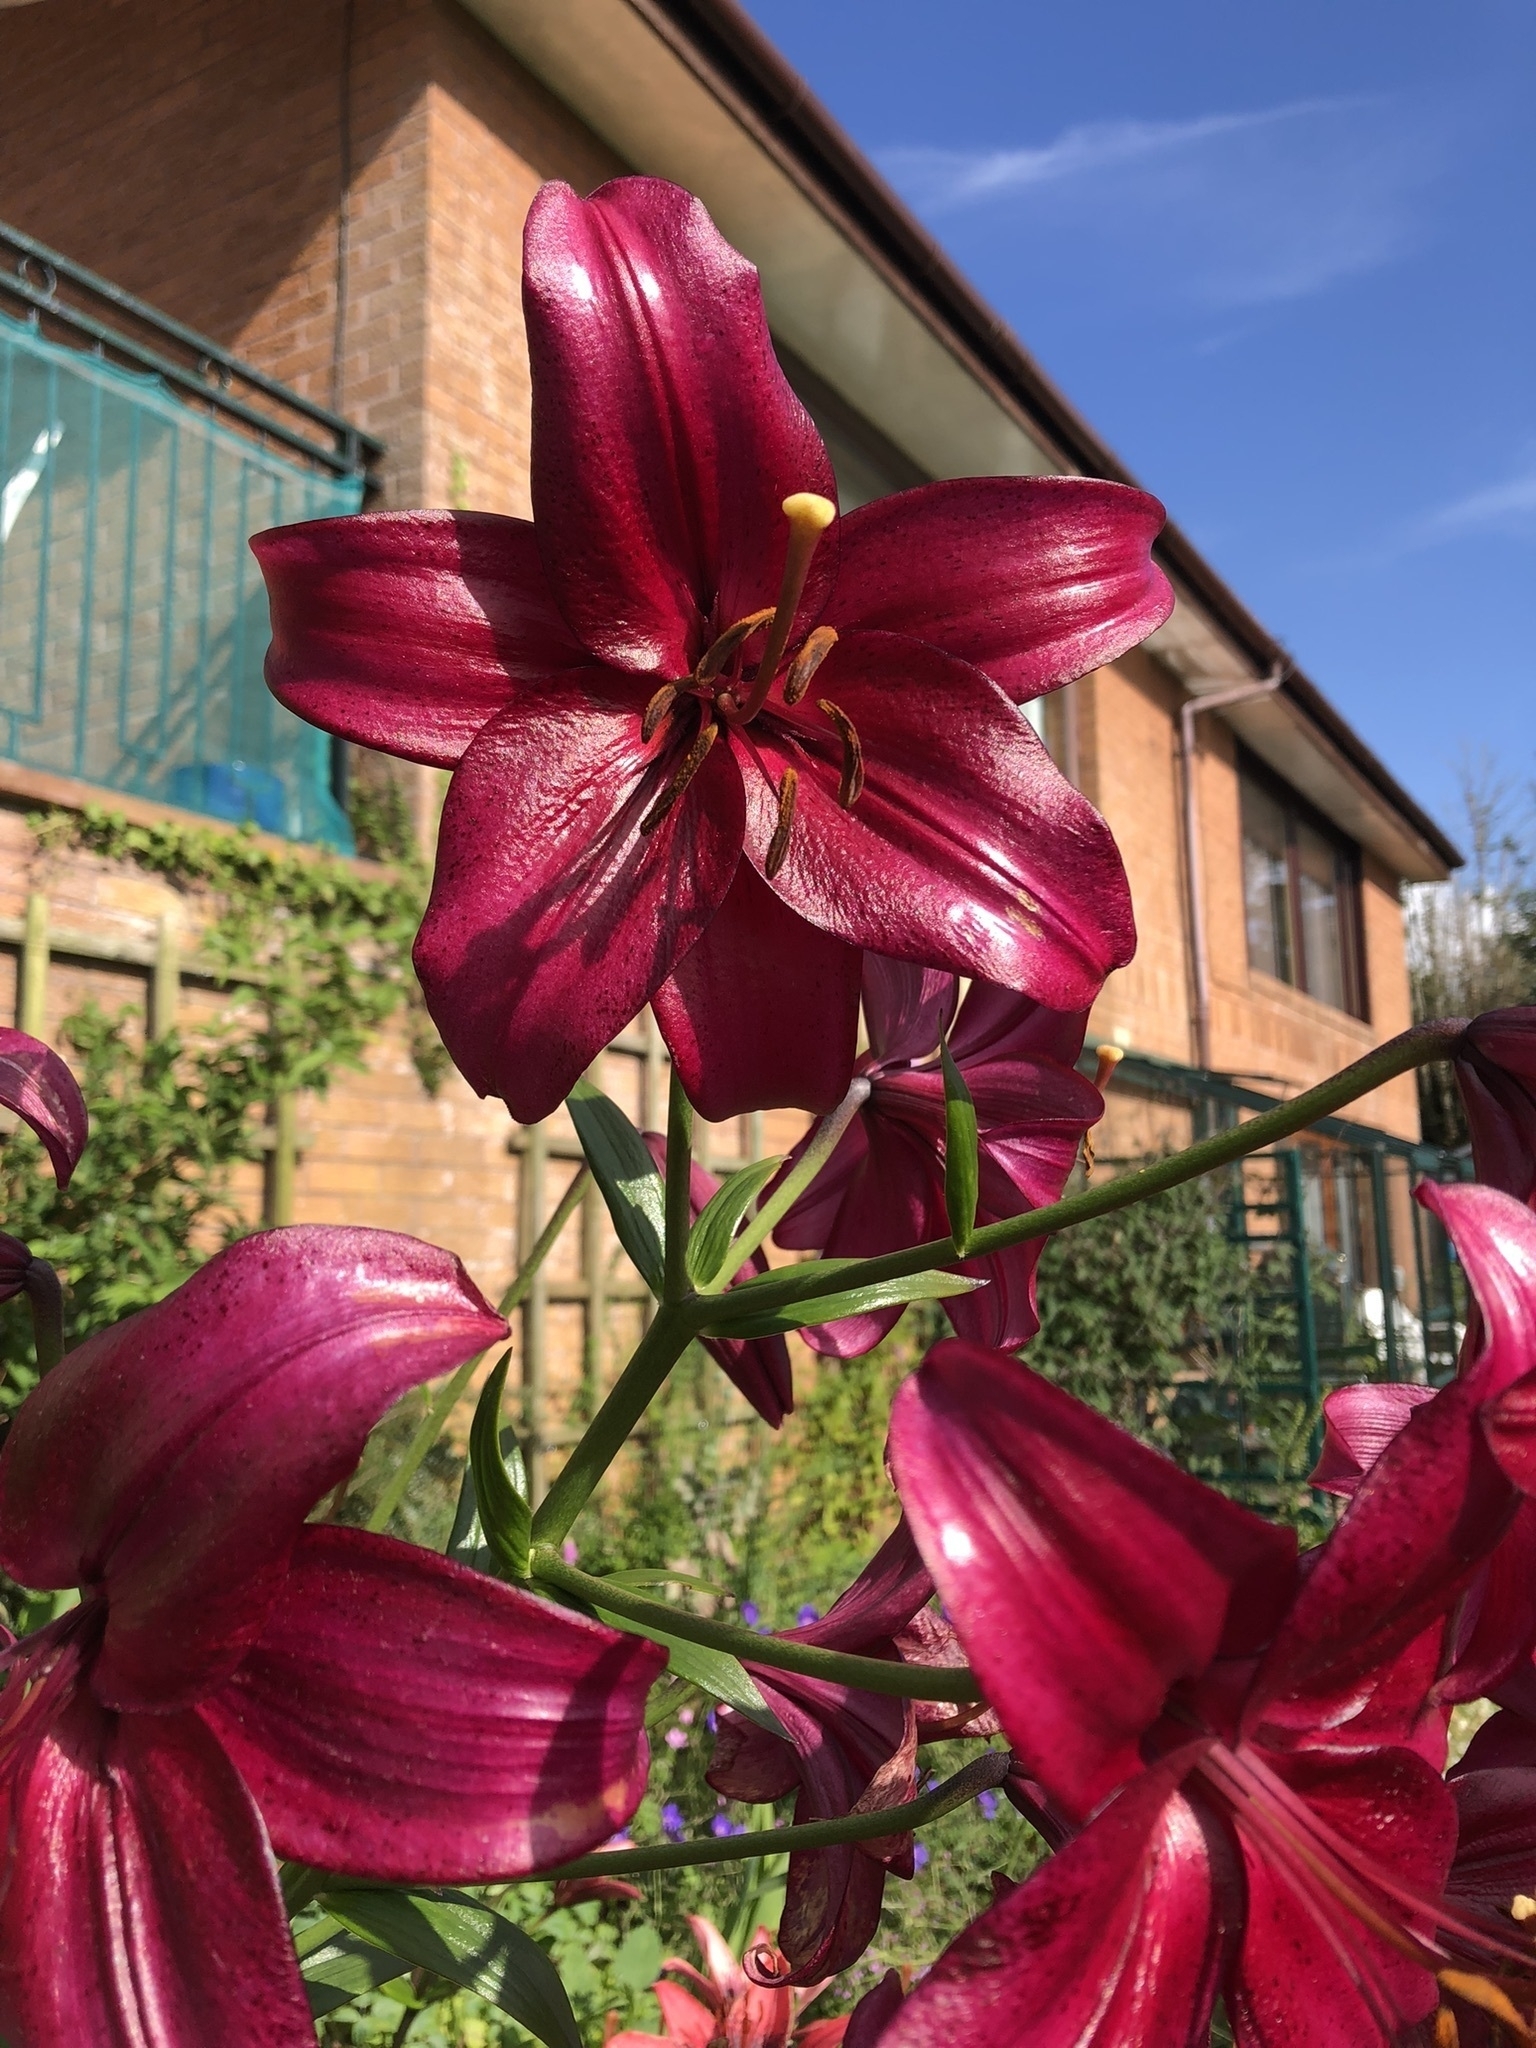 red lilies against a blue sky